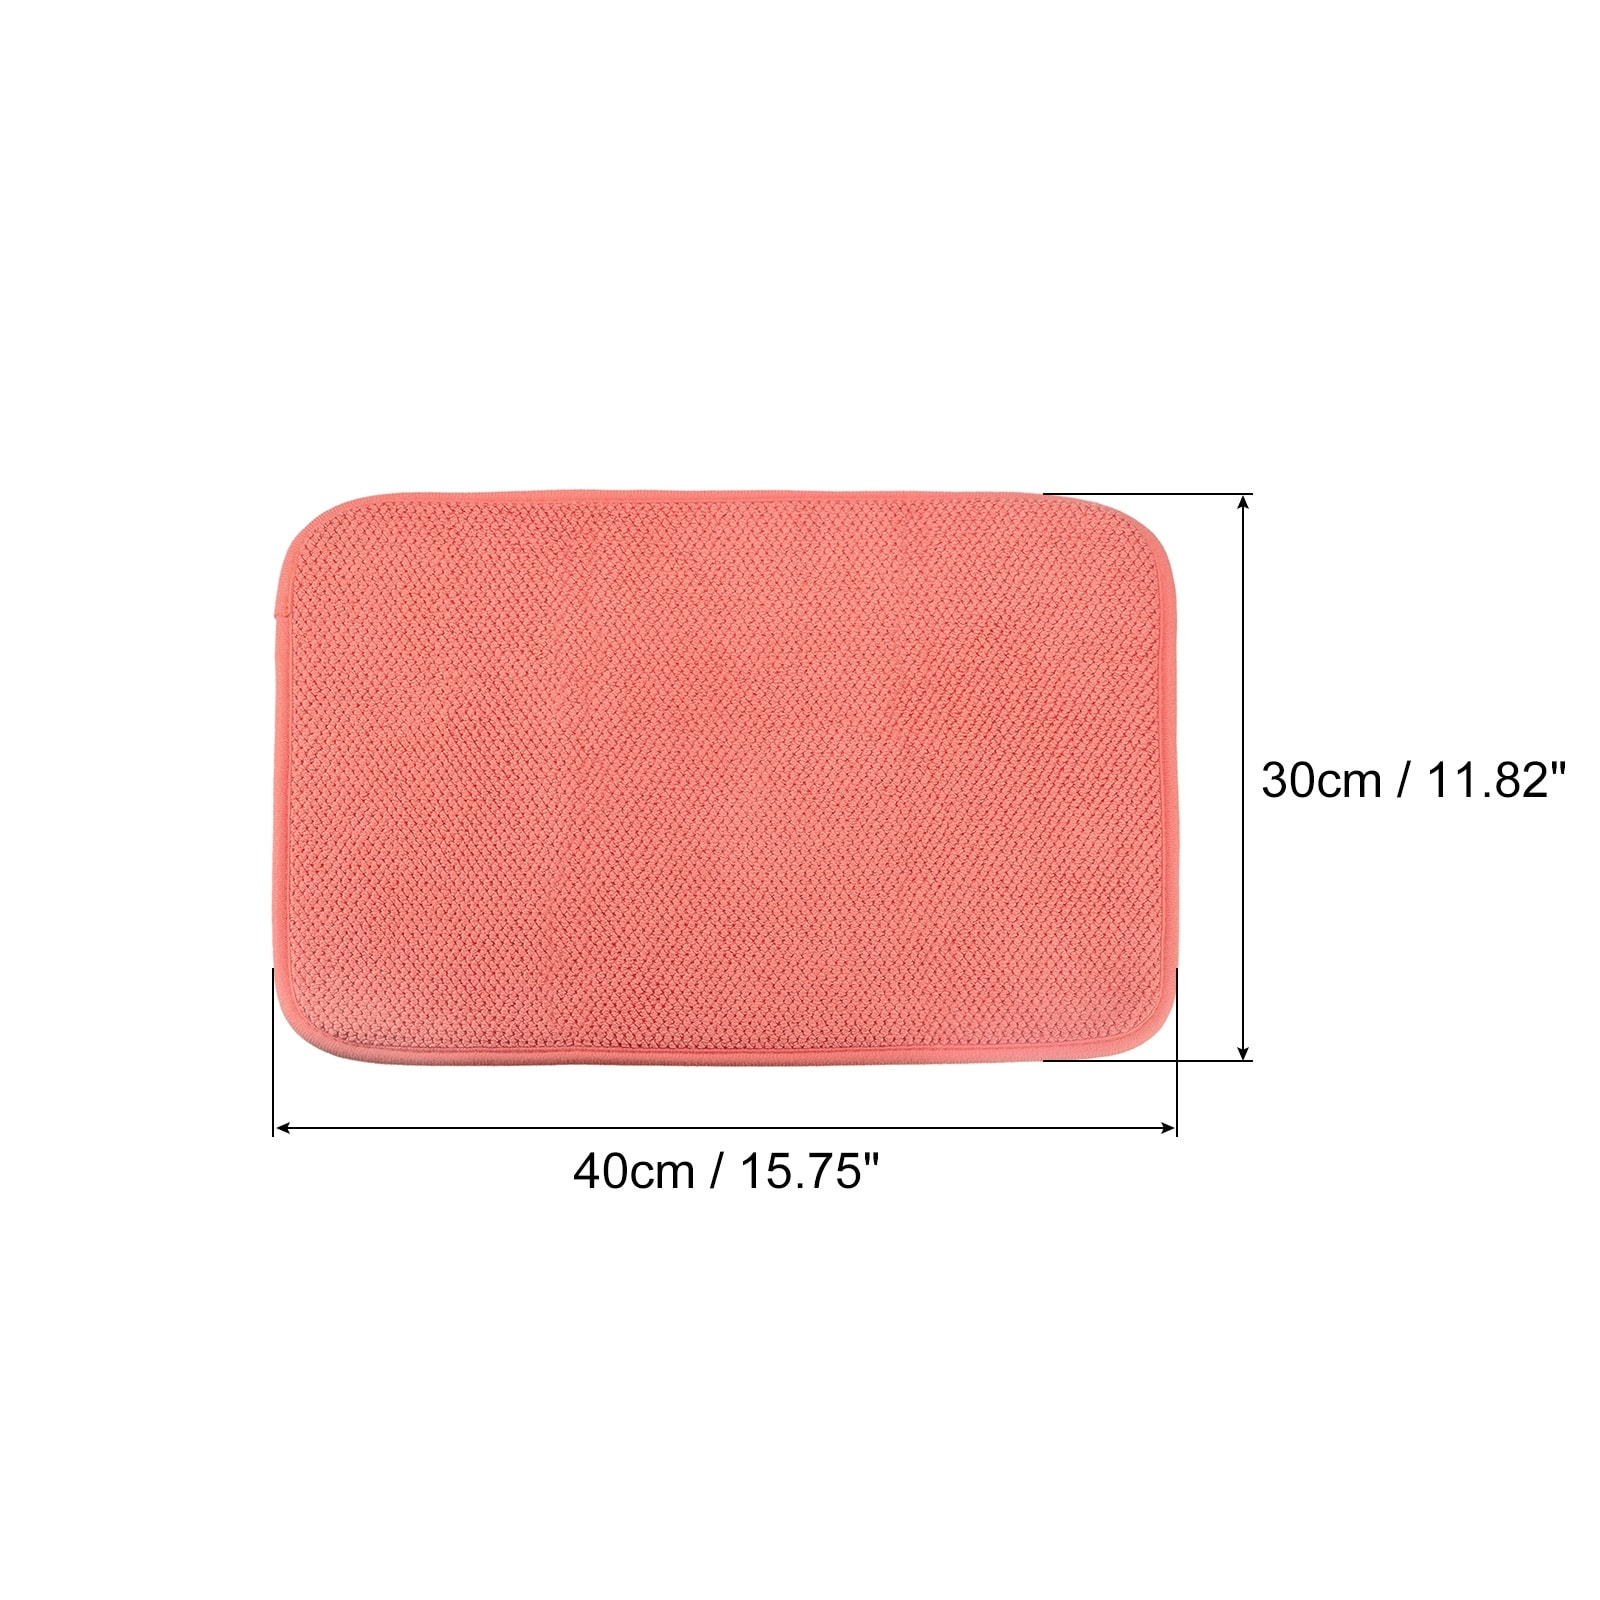 https://ak1.ostkcdn.com/images/products/is/images/direct/6d812784e86707fb068dafa5cb4d0ae370af728f/Microfiber-Dish-Drying-Mat%2C-15.75%22-x-11.82%22-Dishes-Drainer-Mats-Red.jpg